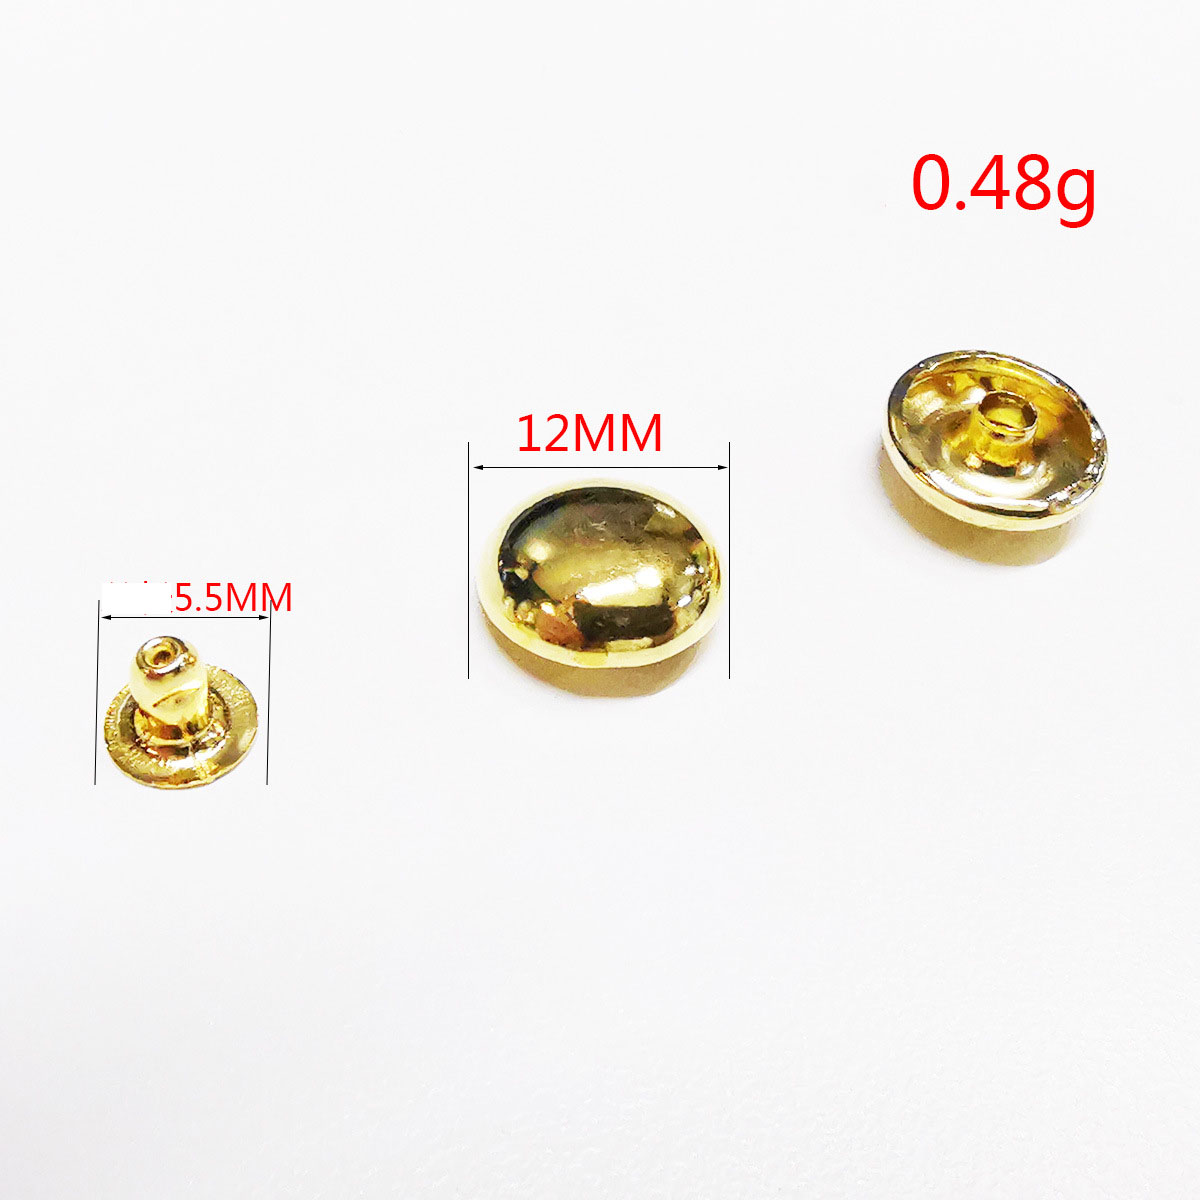 12mm gold